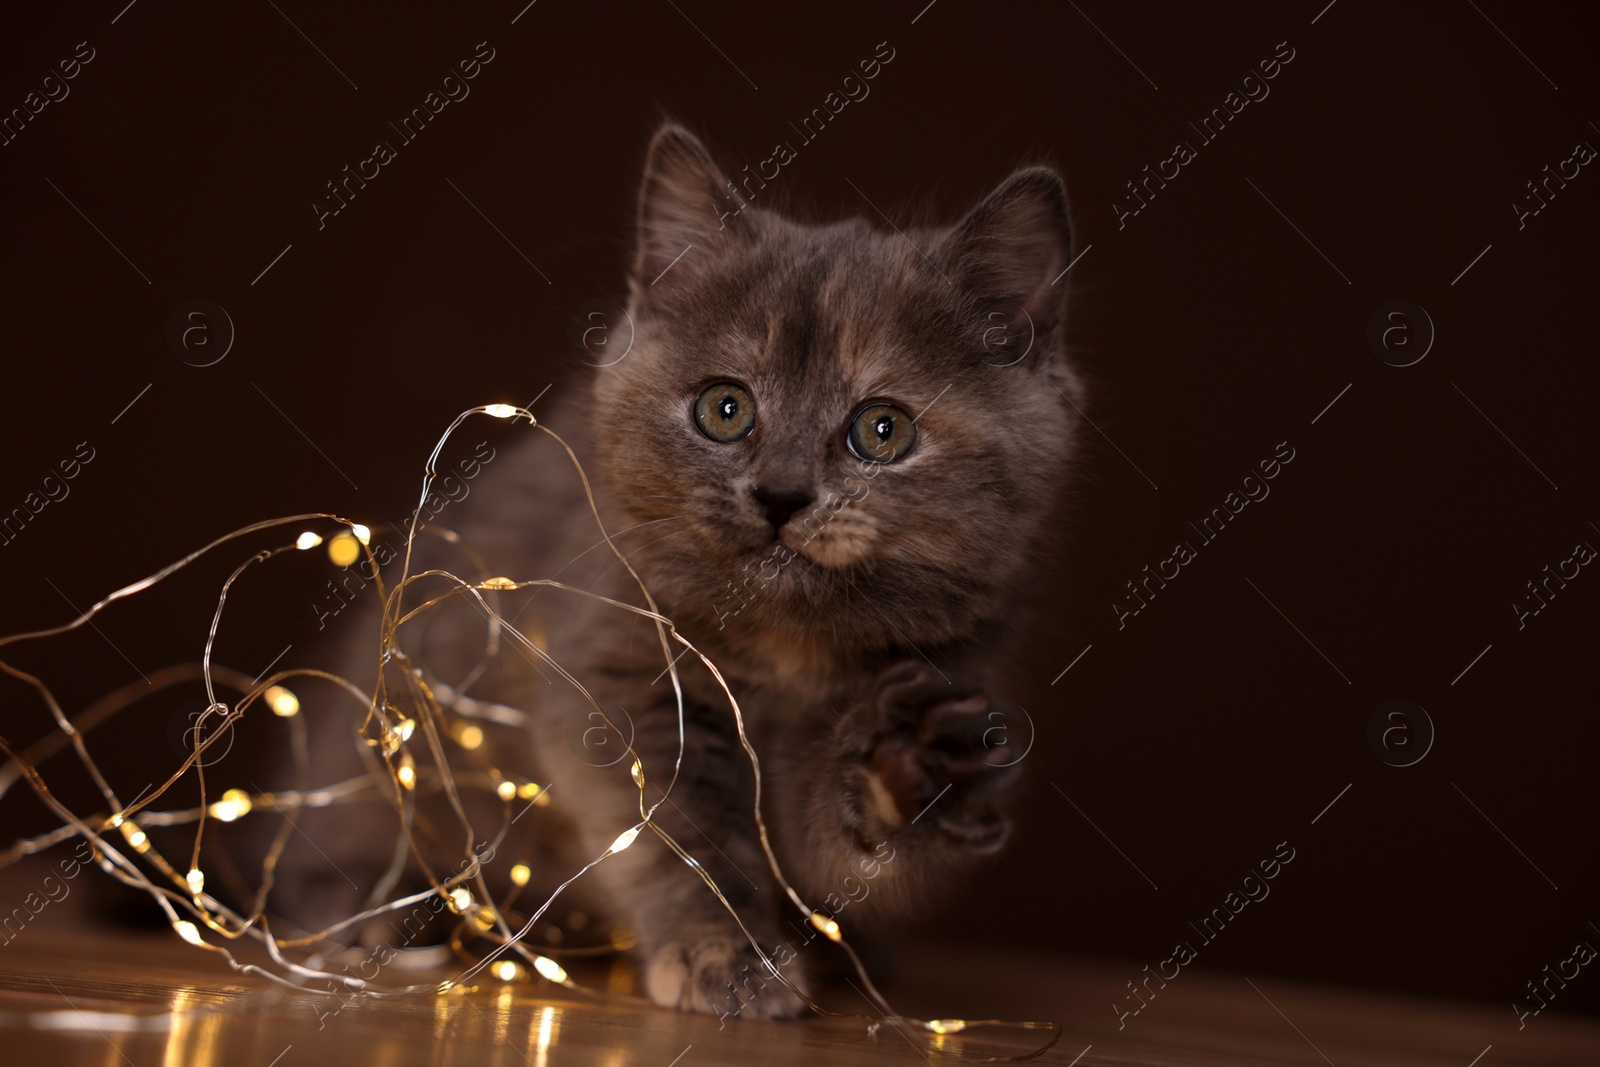 Photo of Cute fluffy kitten playing with string lights on wooden table against brown background. Space for text